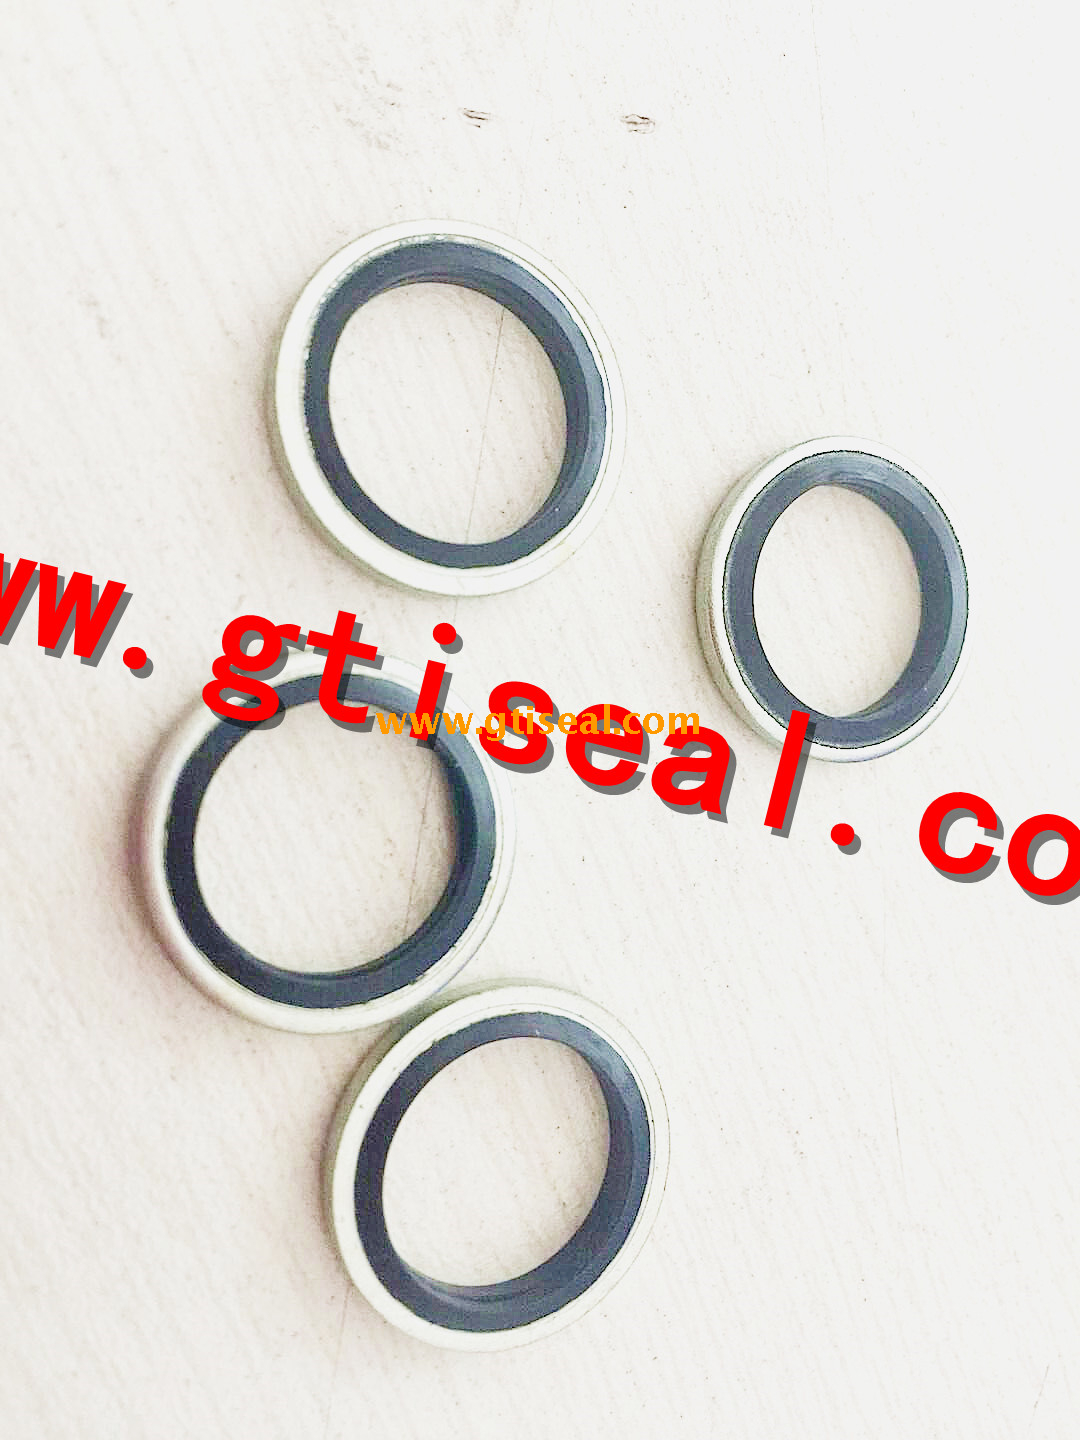 Hydraulic bonded seal washers with self centered